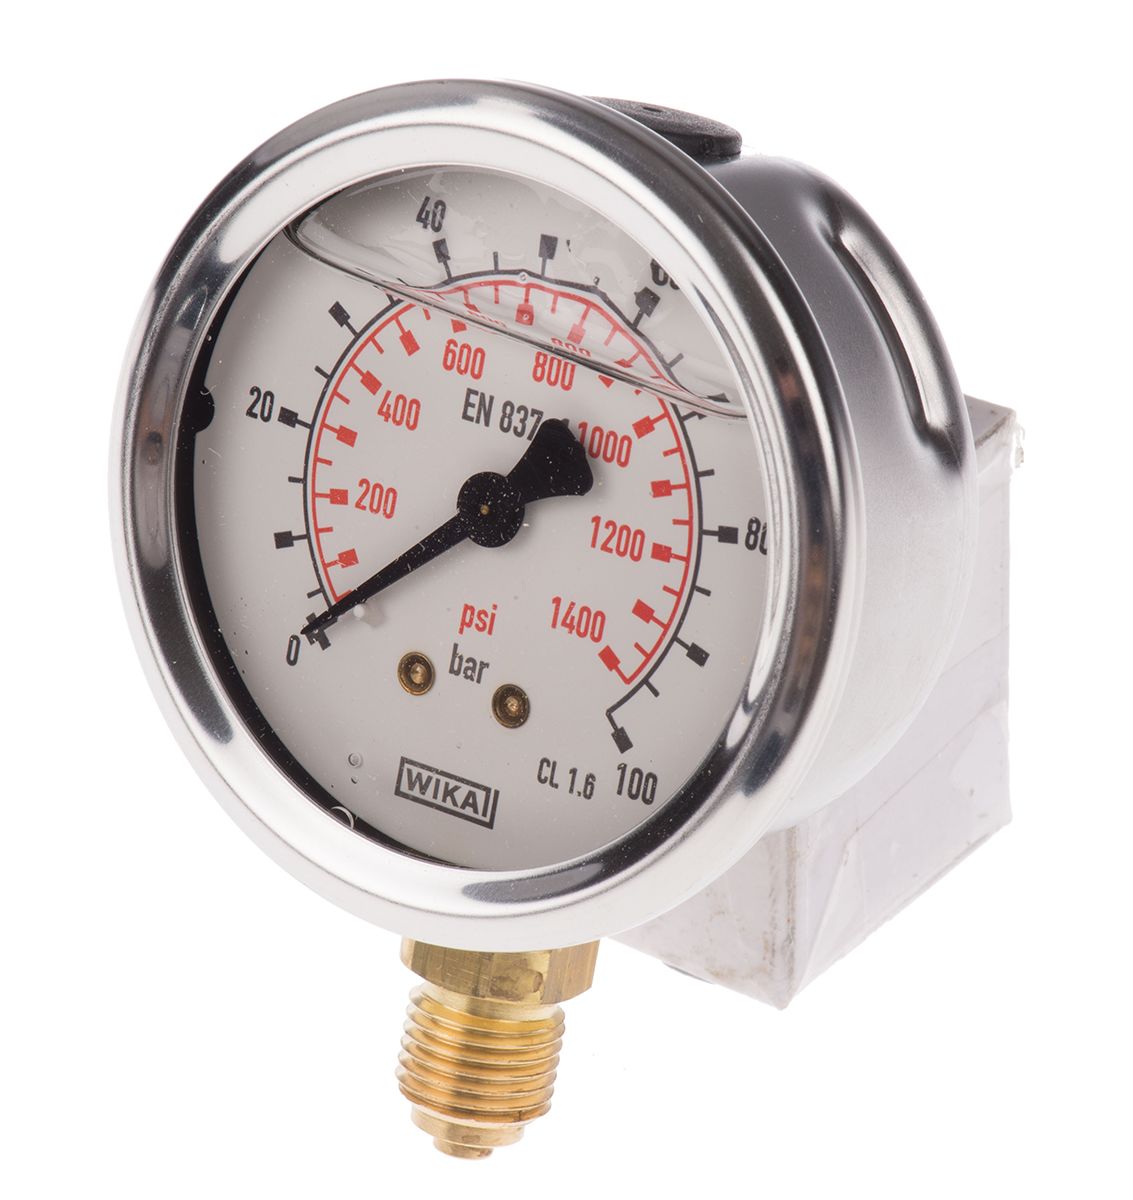 WIKA 9626935 Analogue Positive Pressure Gauge Bottom Entry 100bar, Connection Size G 1/4